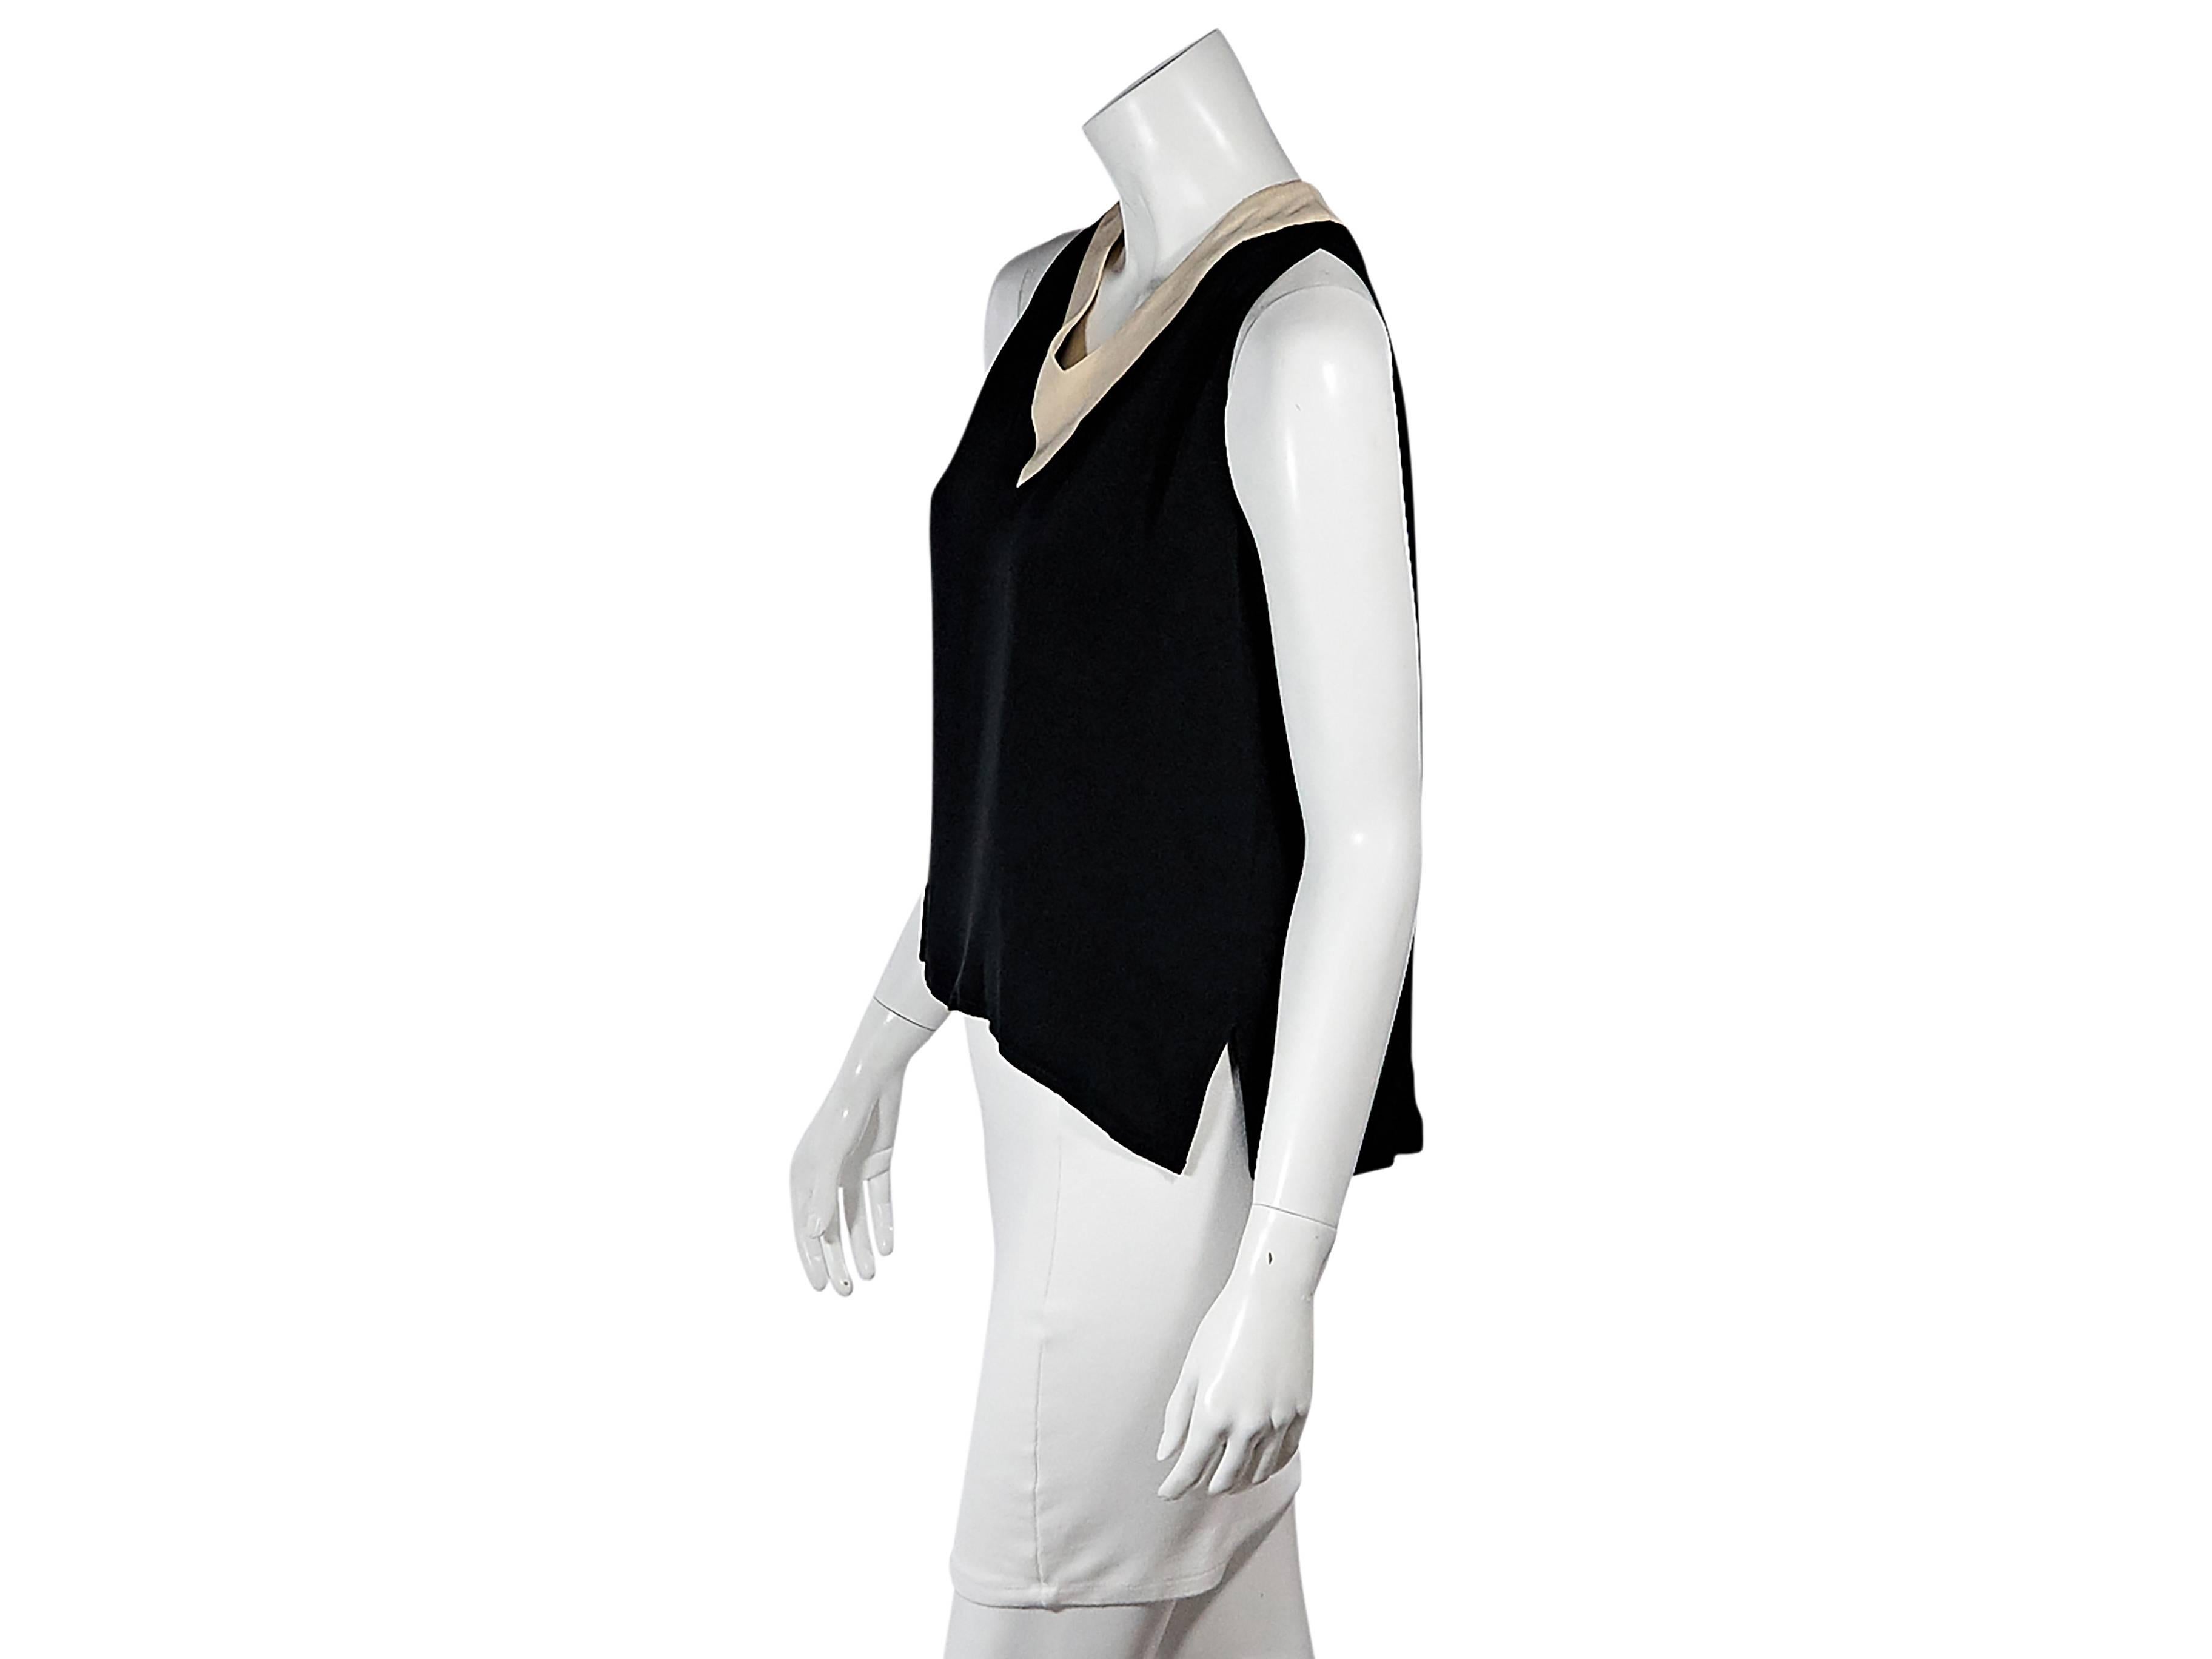 Product details:  Black vintage tank top by Chanel.  Banded tan trim.  V-neck.  Sleeveless.  Button back closure.  Hi-lo hem with side slits.    
Condition: Pre-owned. Very good.

Est. Retail $ 998.00
